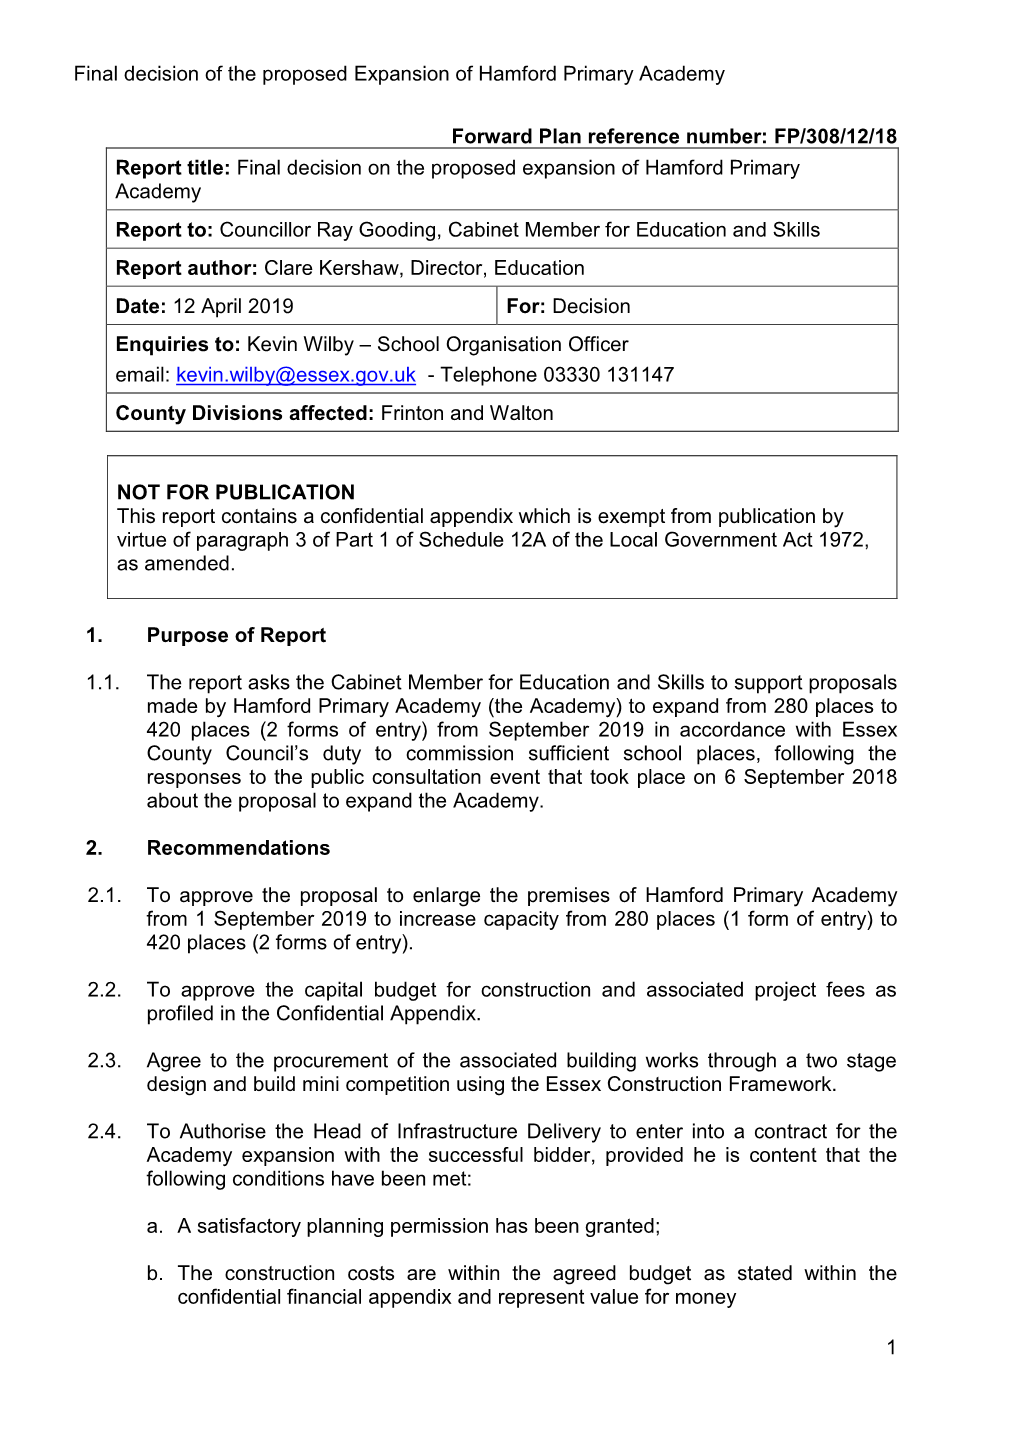 Final Decision of the Proposed Expansion of Hamford Primary Academy